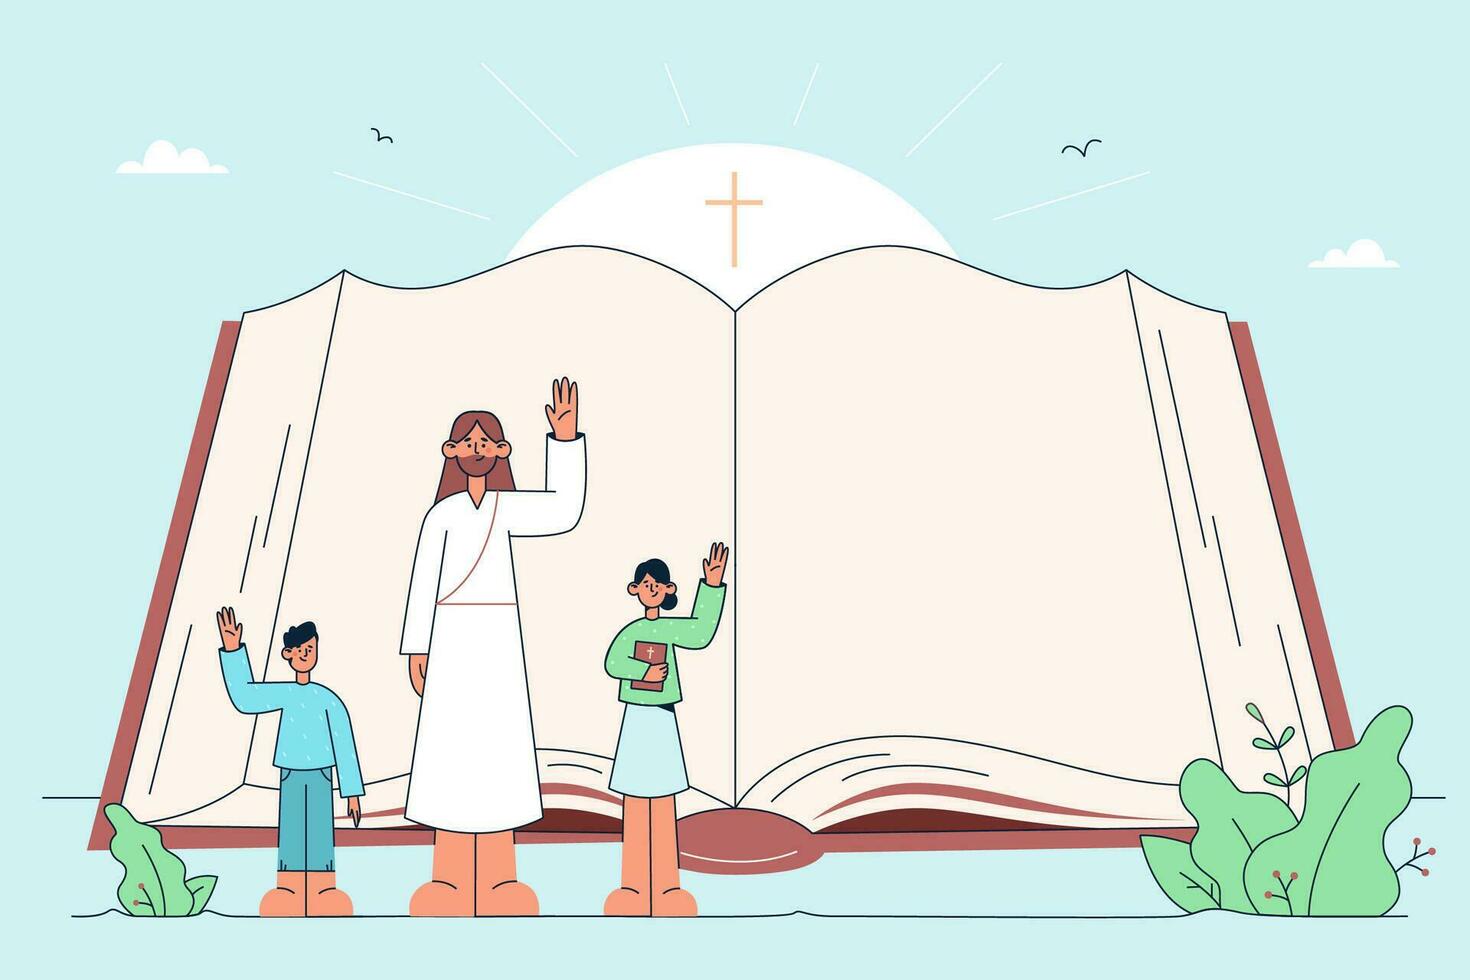 Holy Bible, Christianity, religion concept. Open religious book with Jesus and children characters waving their hands showing importance of religion for everyone vector illustration